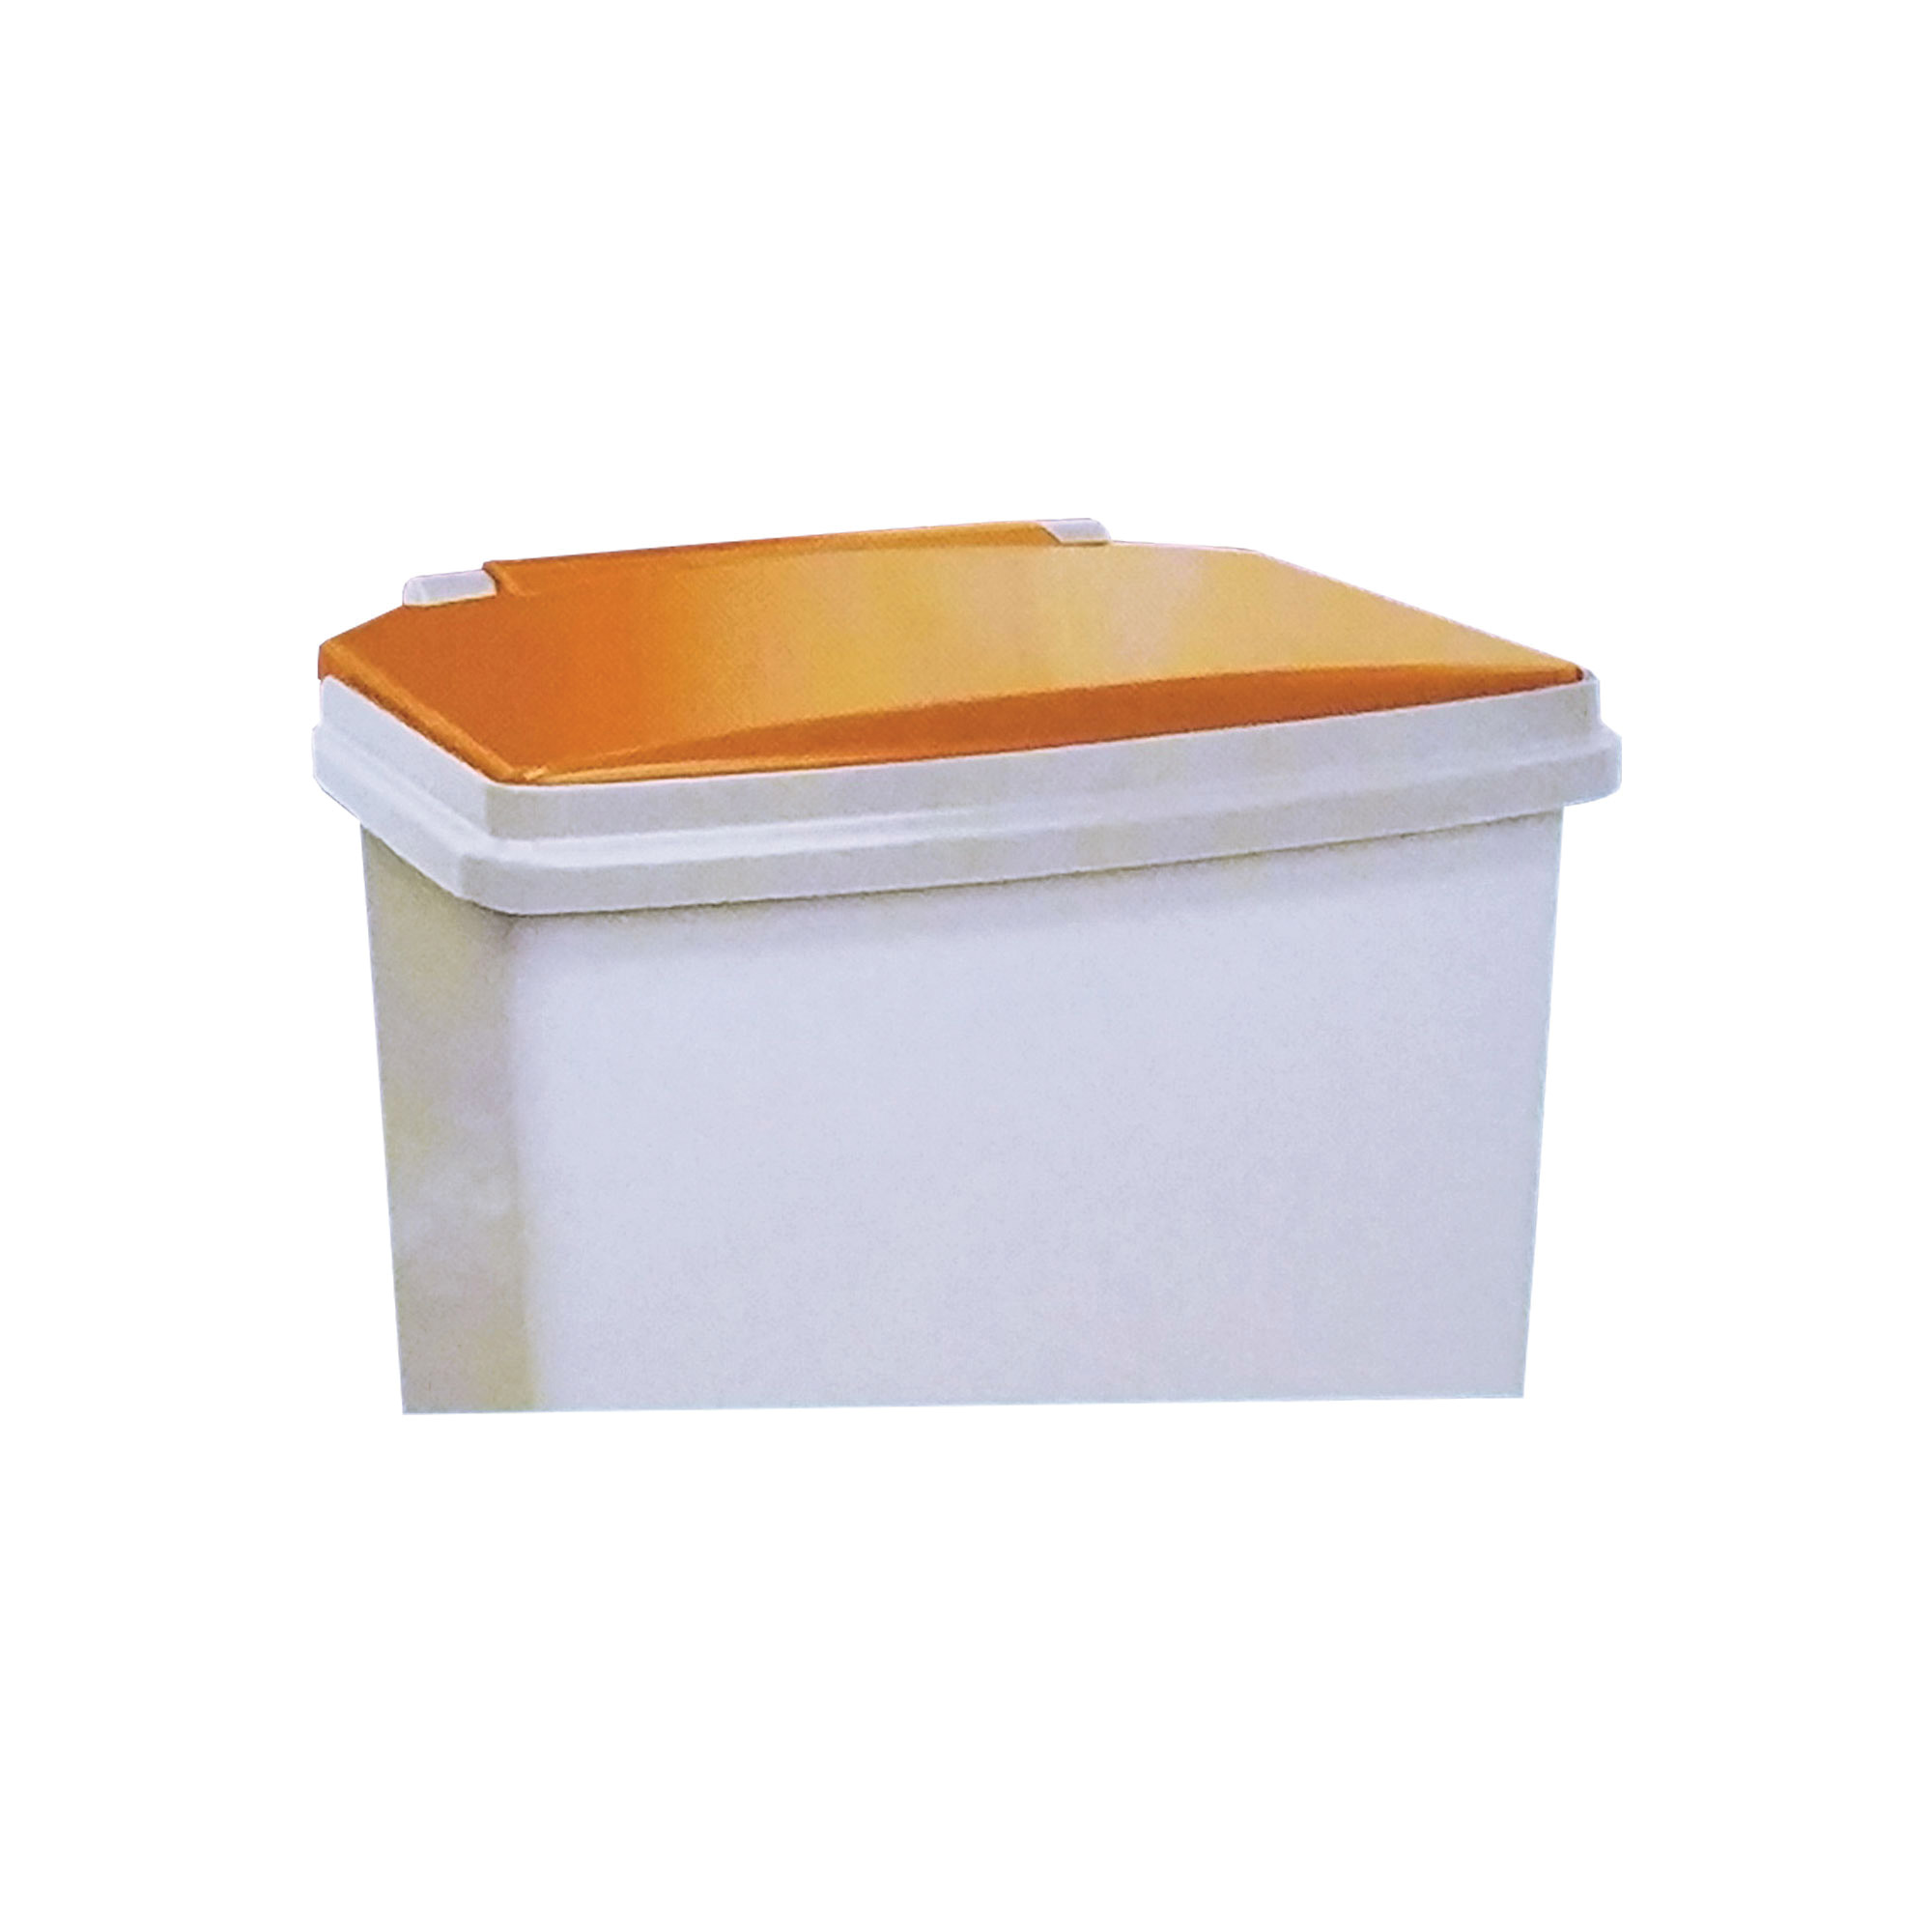 Orange Replacement Lid For EB-3295